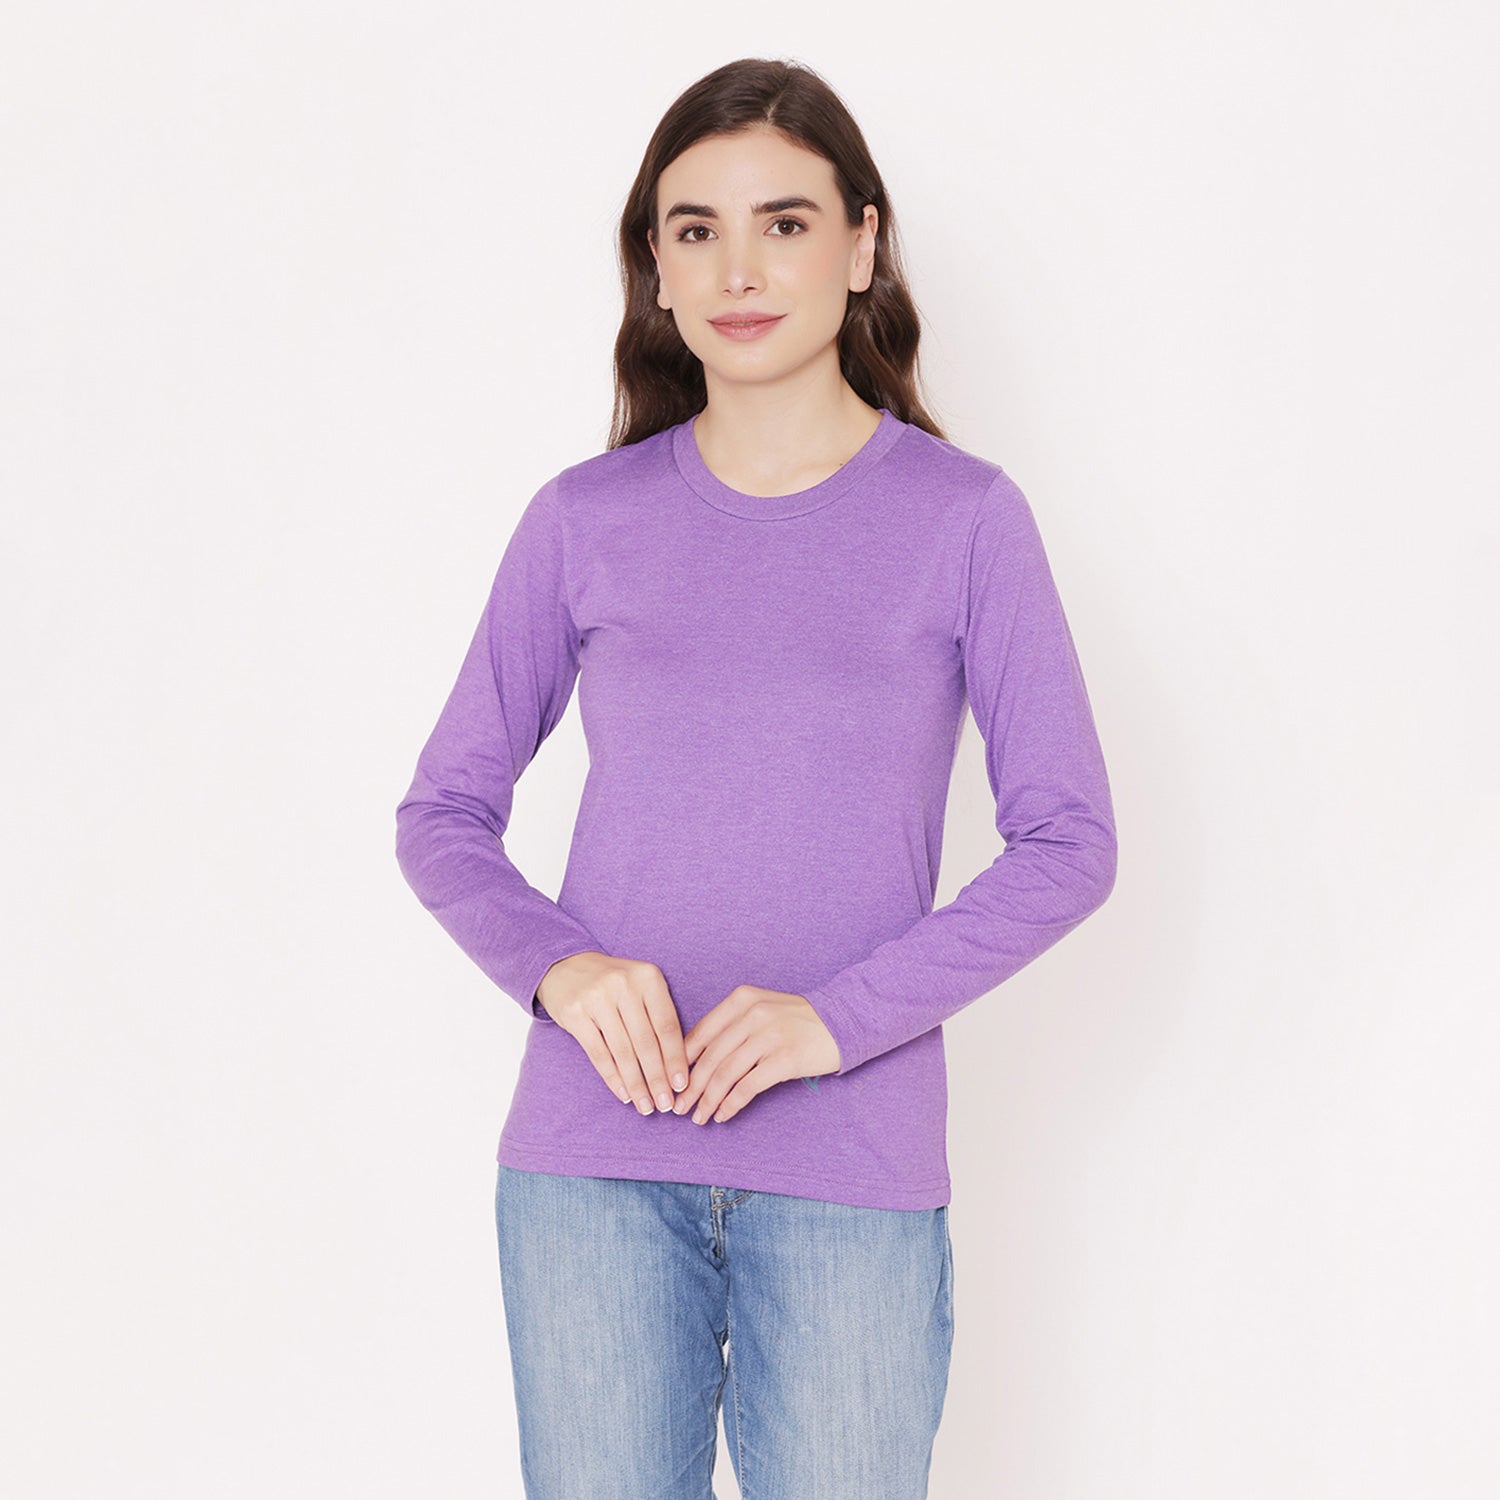 Business Casual Jeans Outfit - Lady in VioletLady in Violet